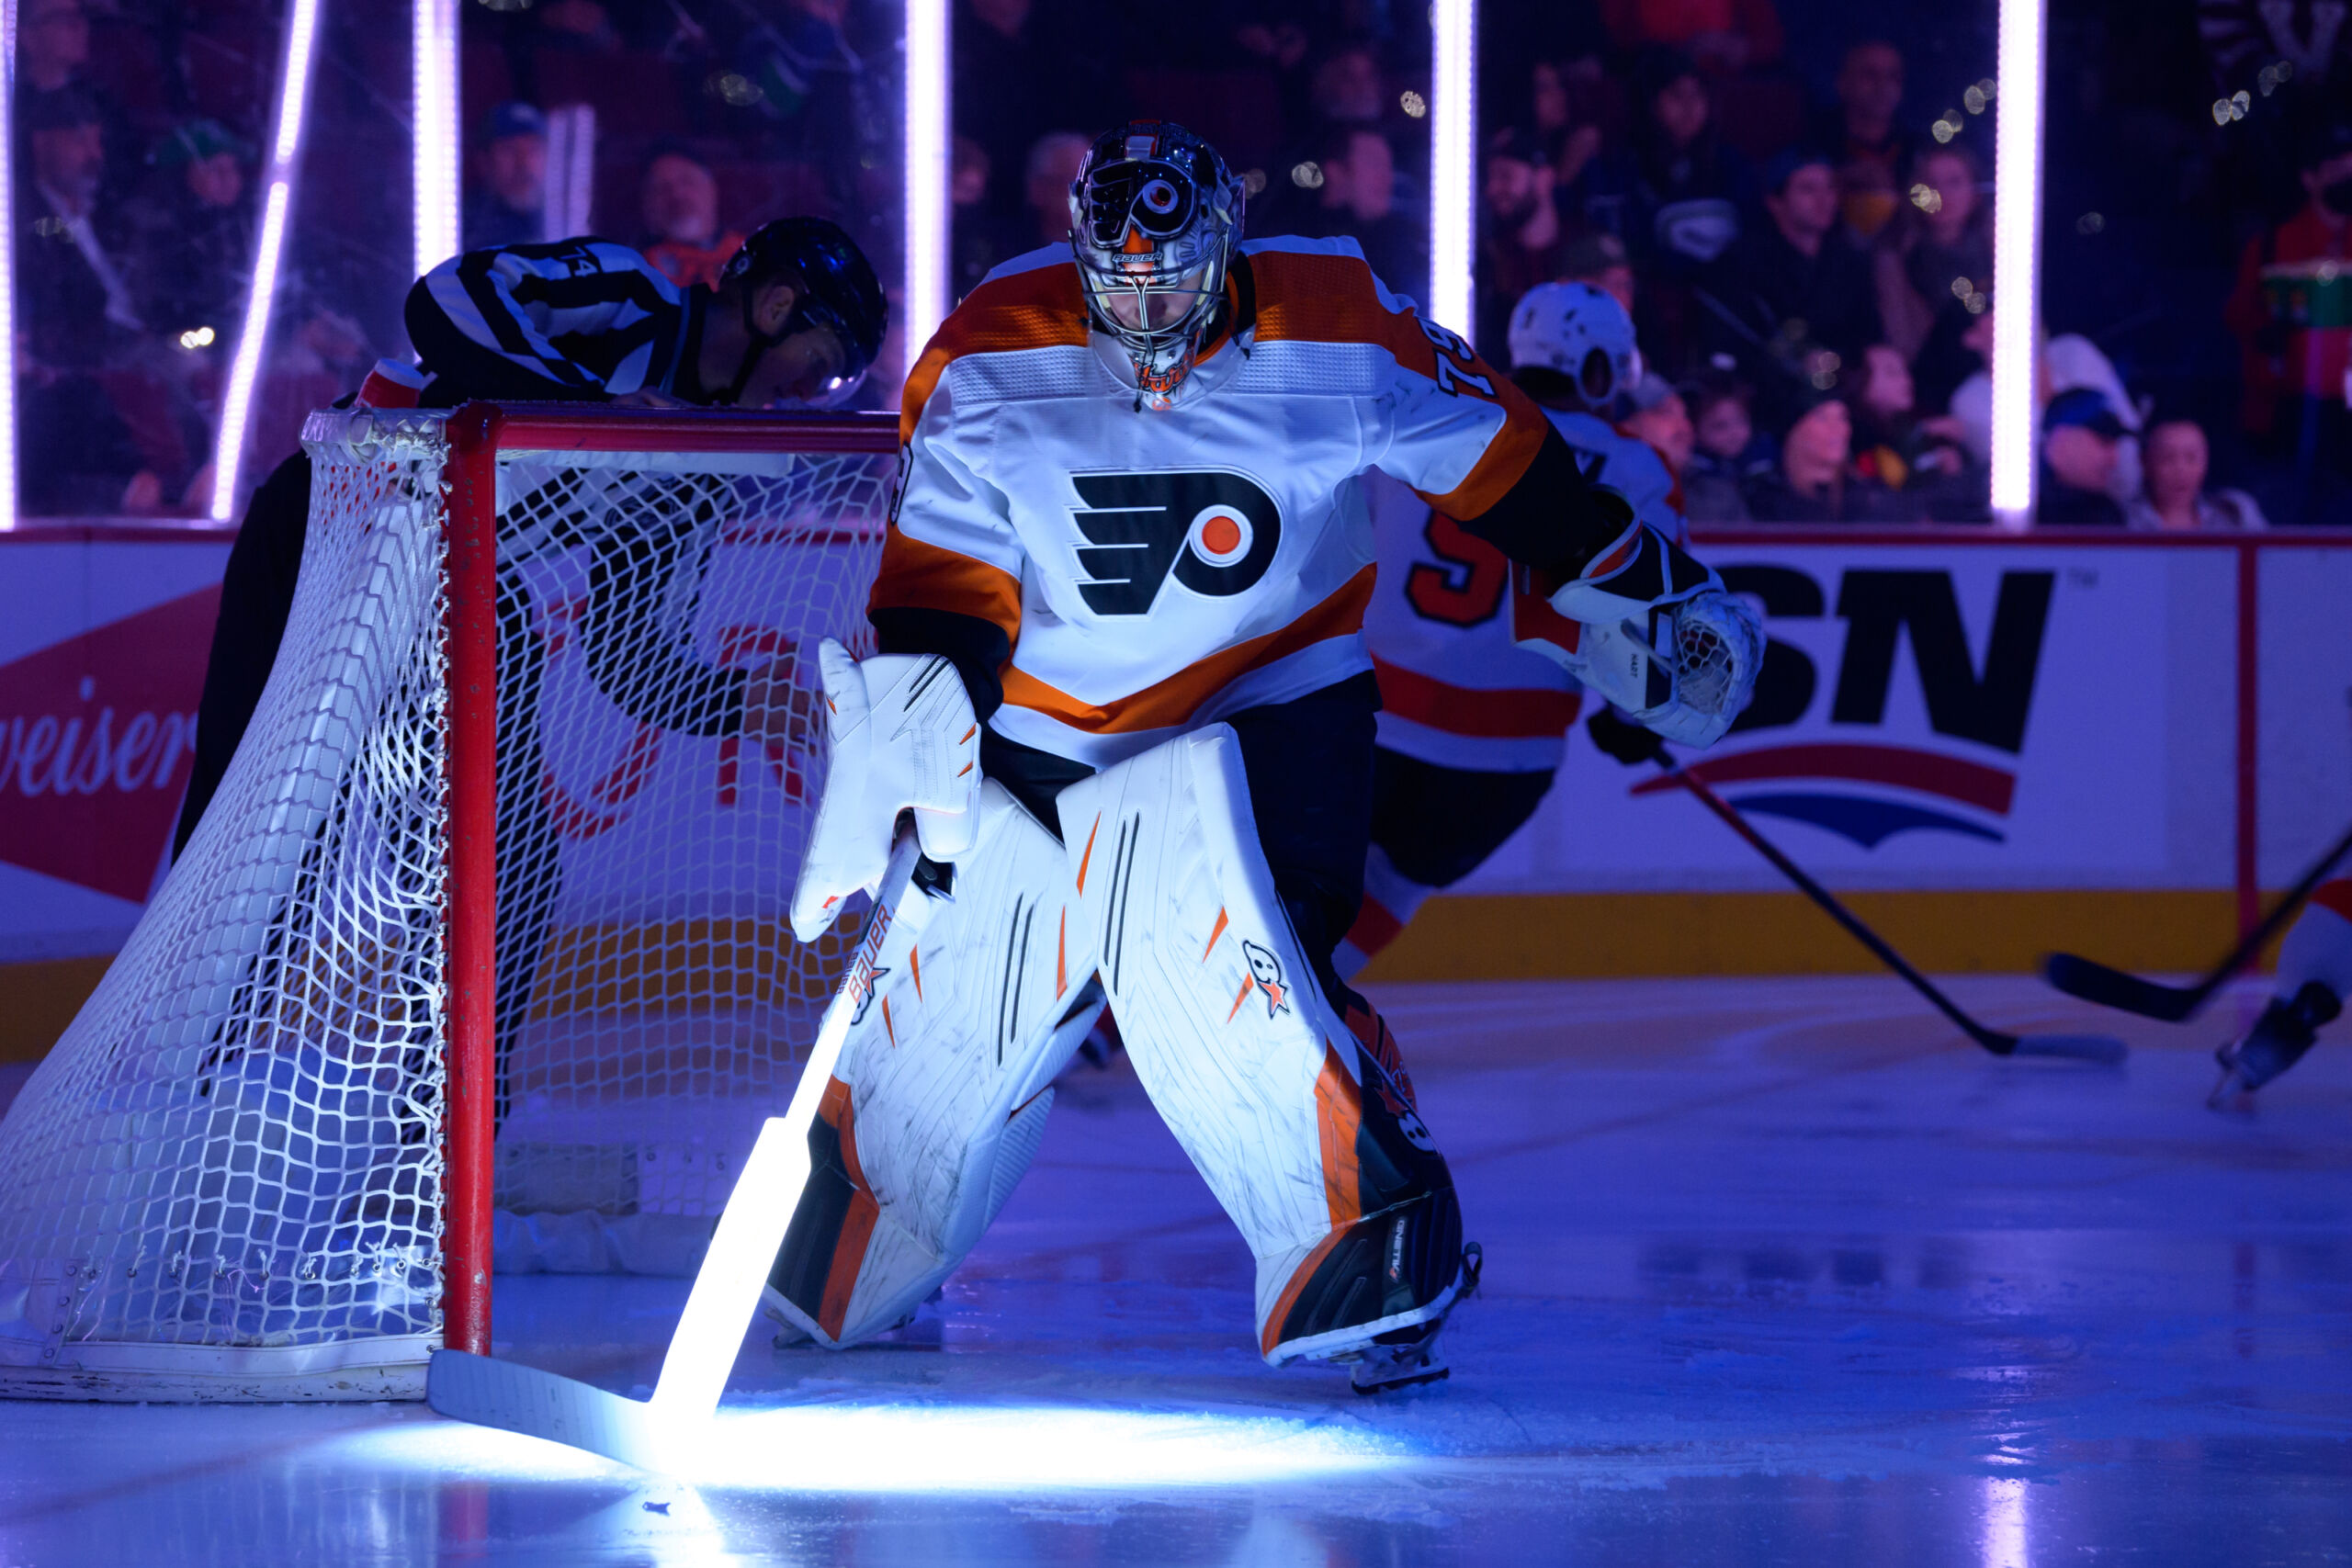 Flyers sign goalie Carter Hart to 3-year contract extension – NBC Sports  Philadelphia